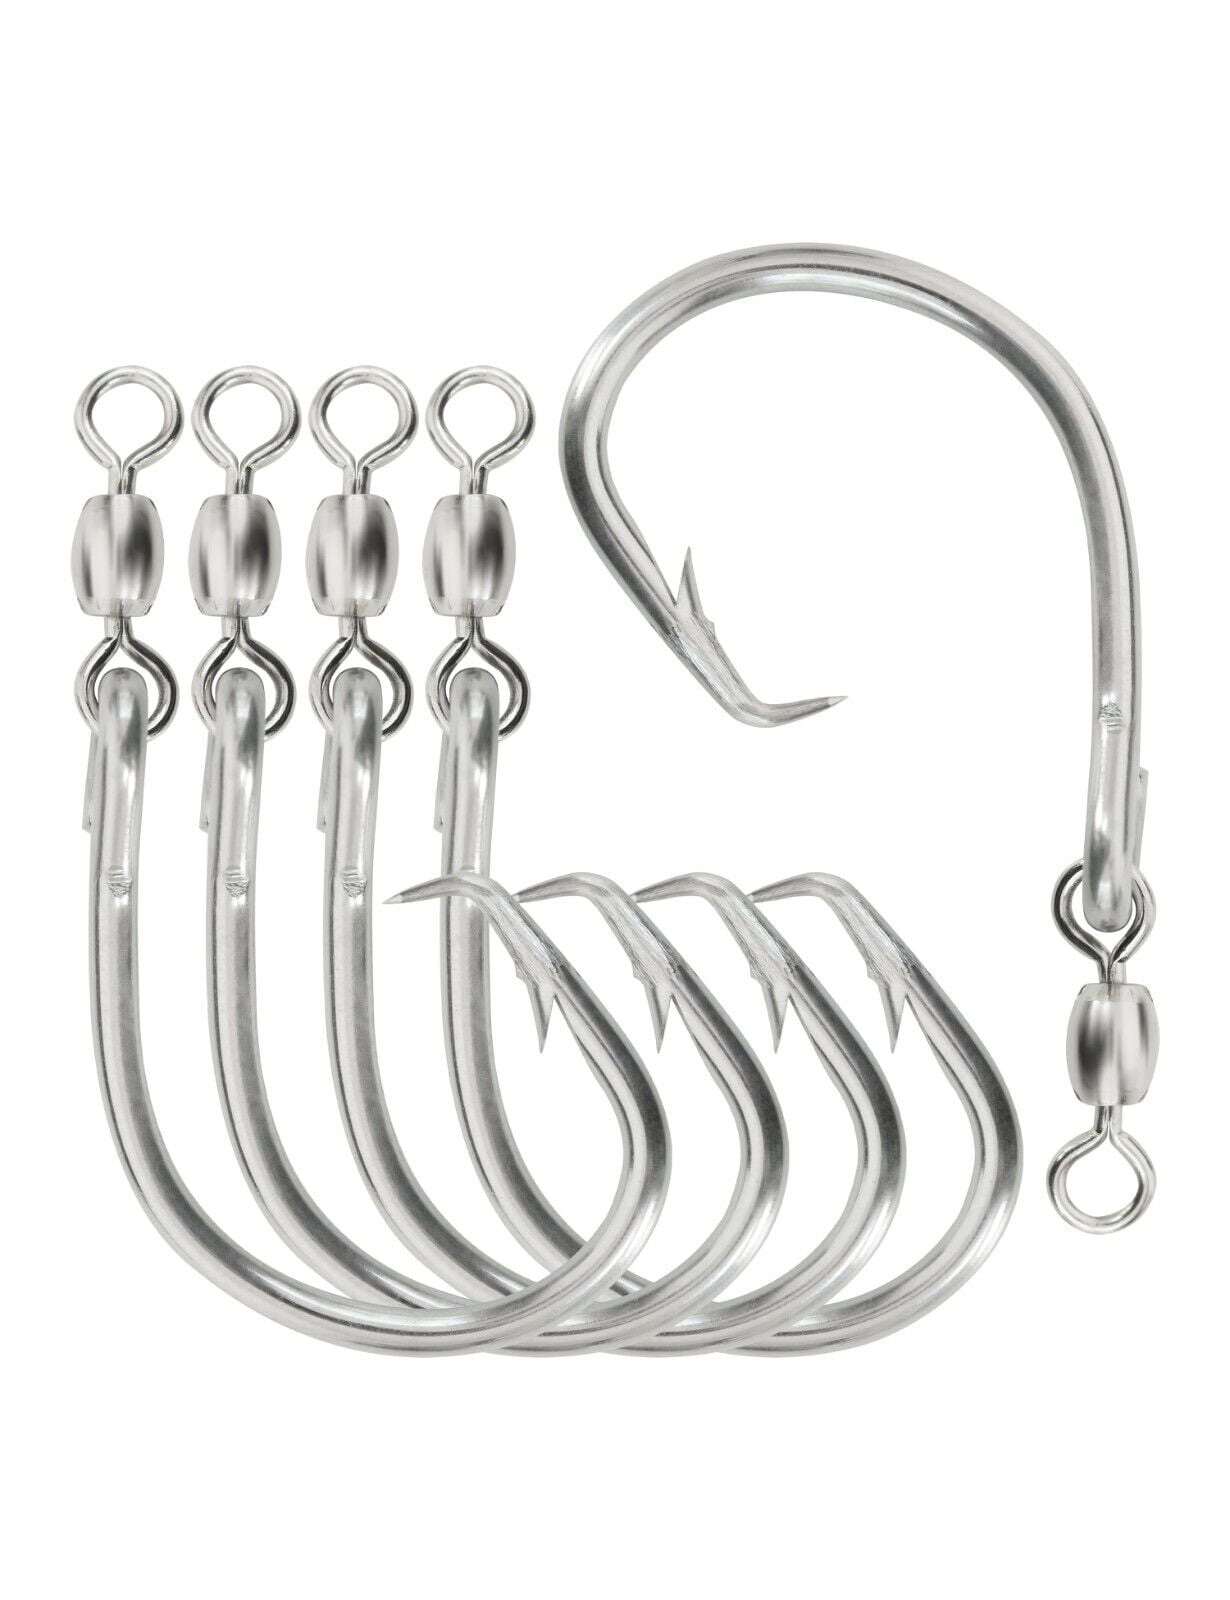 BLUEWING Offset Circle Hook with Swivel 10pcs Stainless Steel